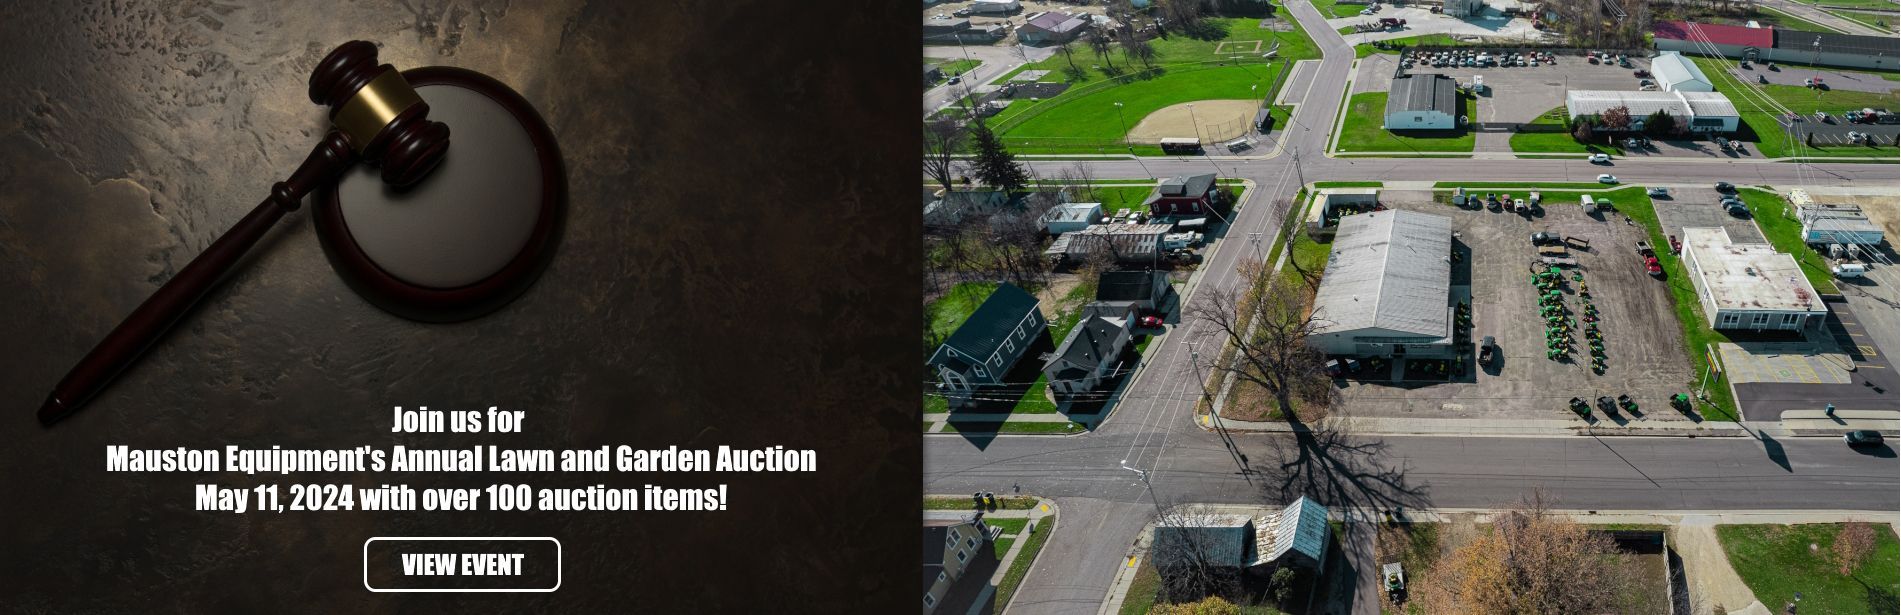 Mauston Equipment Annual Lawn and Garden Auction